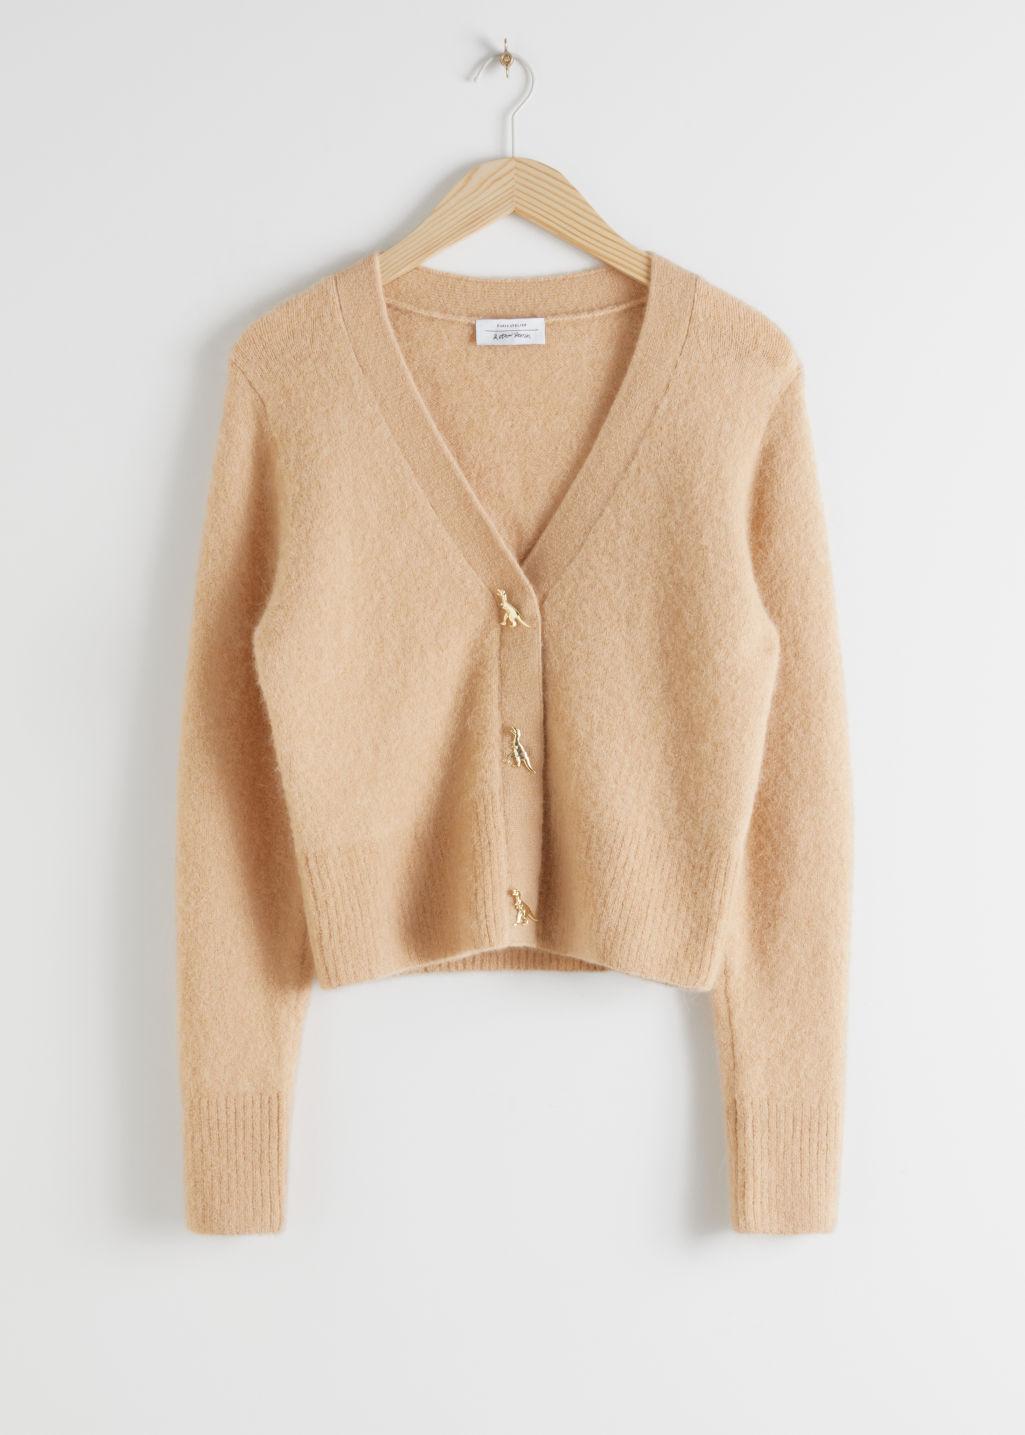 & Other Stories Dinosaur Button Knit Cardigan in Beige (Natural) - Lyst